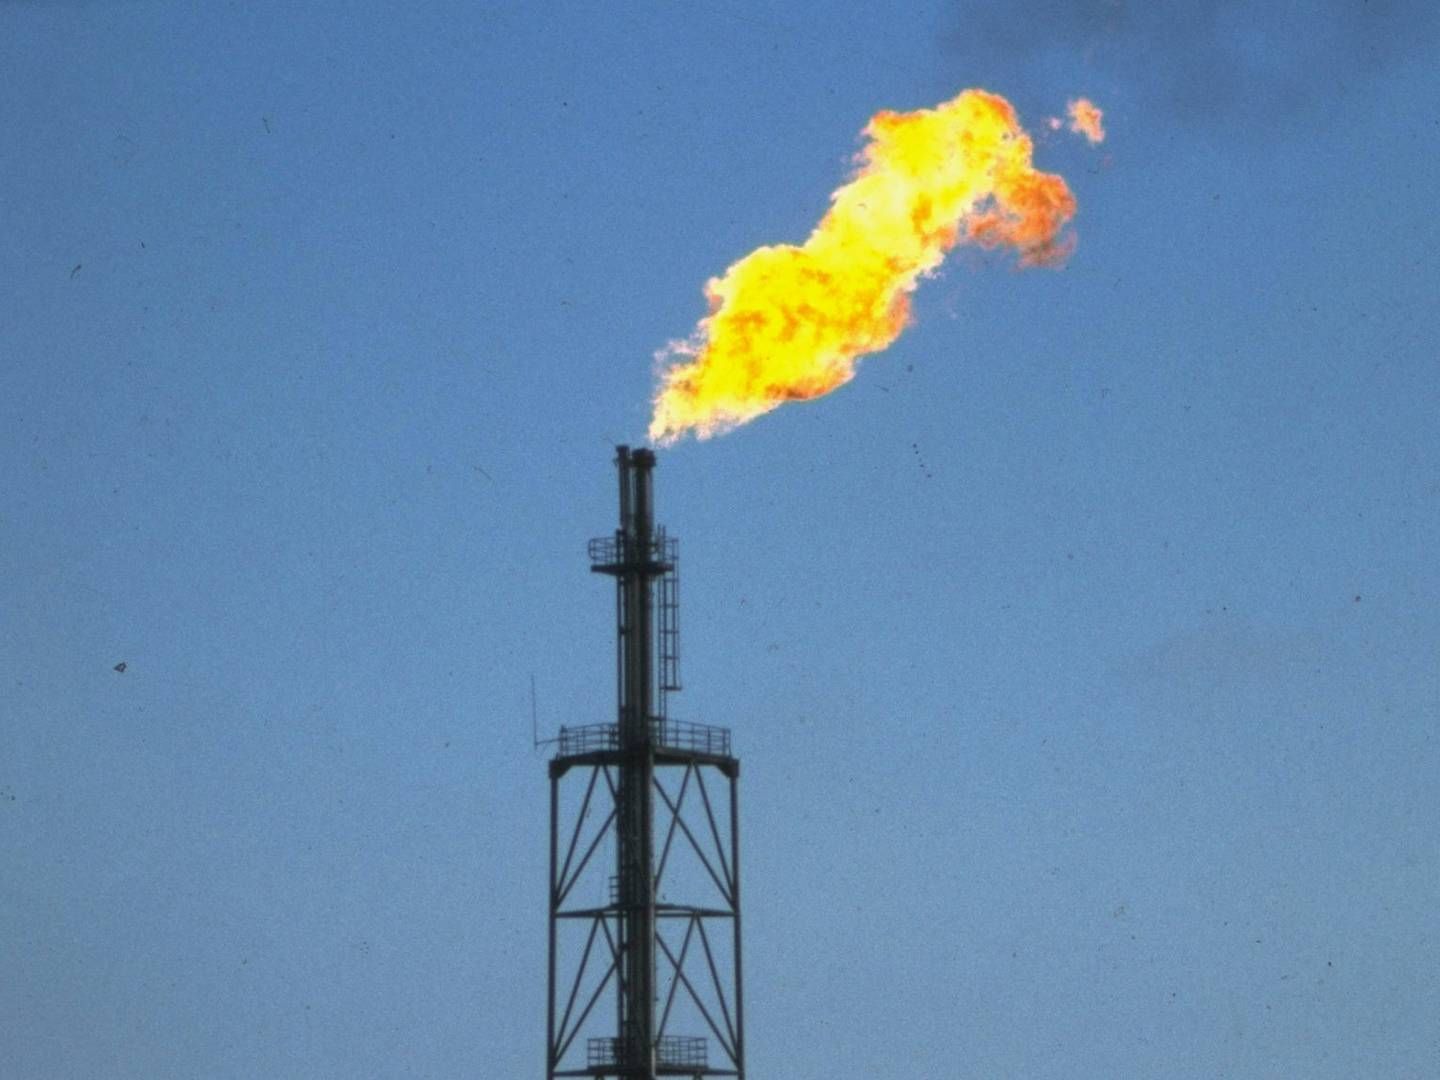 Next summer, flaring of excess gas related to oil production will be illegal in Denmark unless strictly necessary for safety reasons. This will also apply to the TotalEnergies-operated Gorm field (photo) where routine flaring has been standard practice for years. | Photo: Erik Kragh